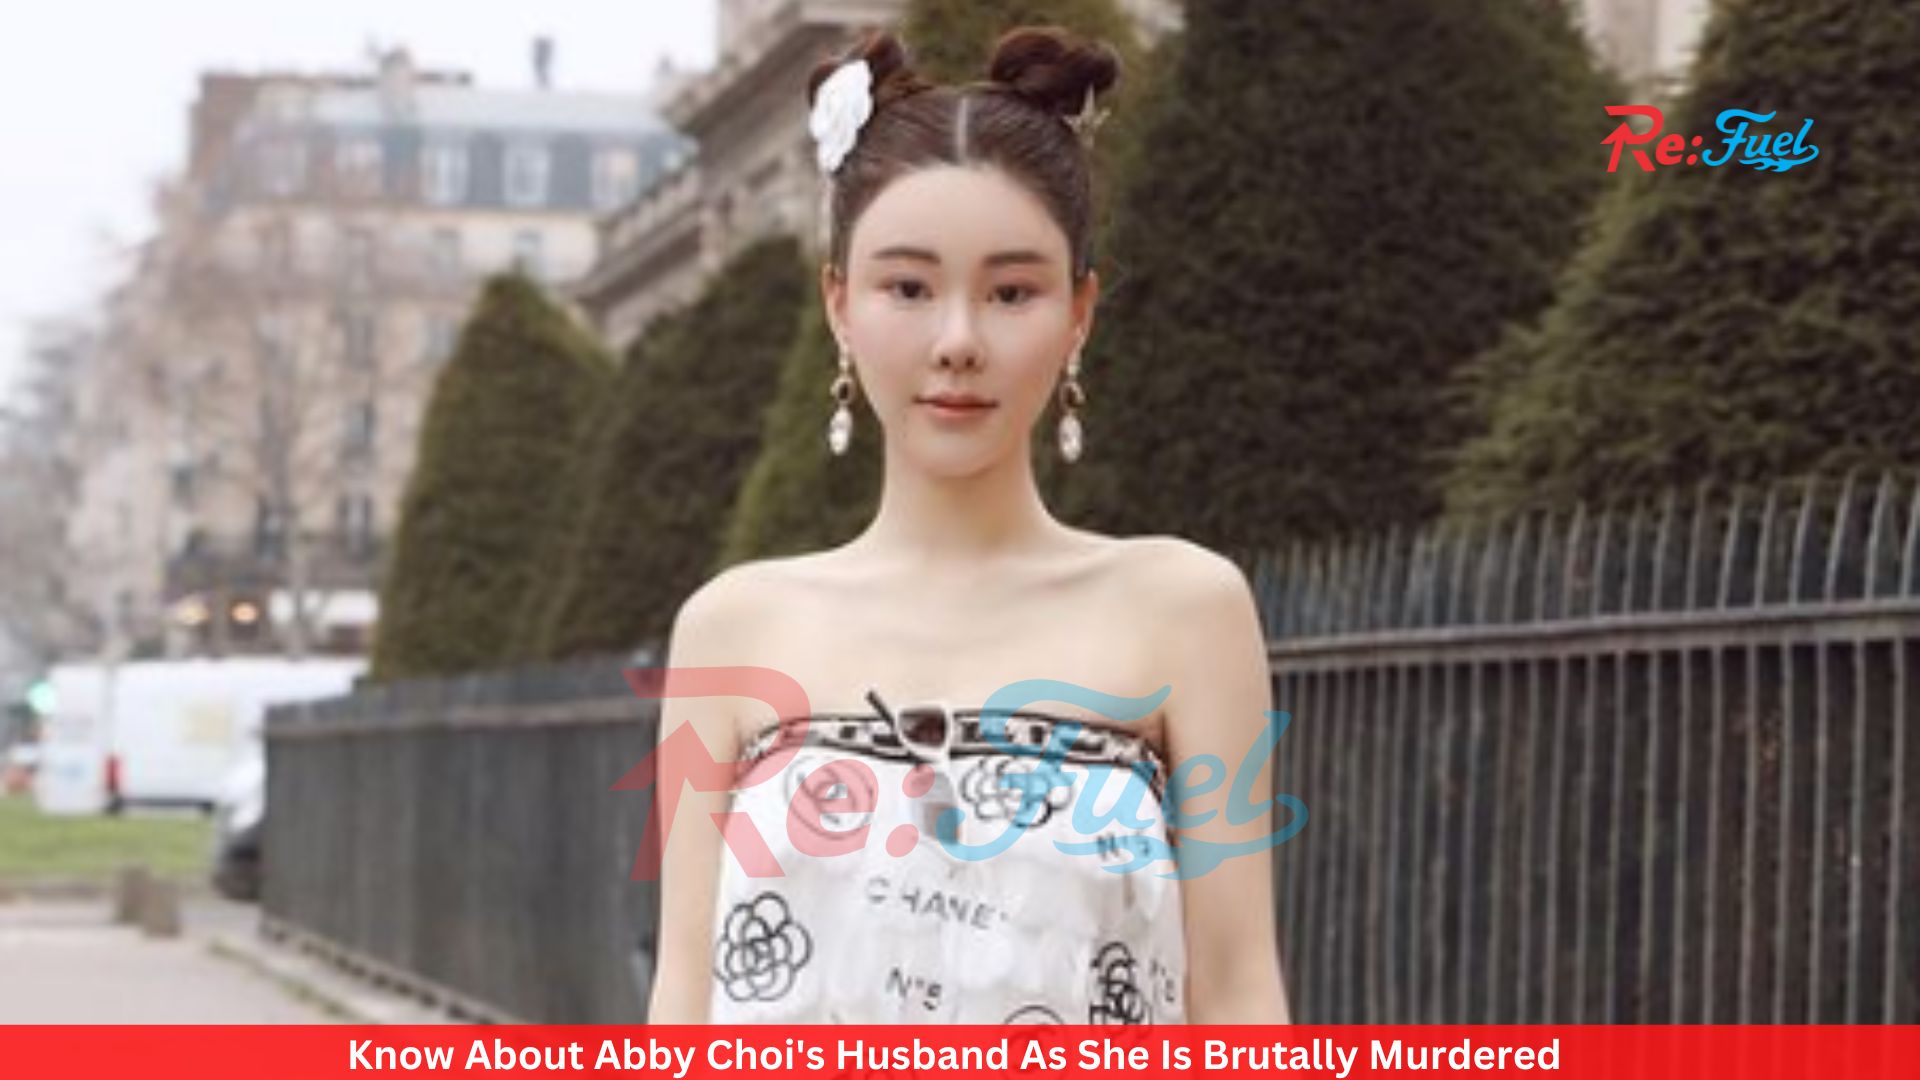 Know About Abby Choi's Husband As She Is Brutally Murdered